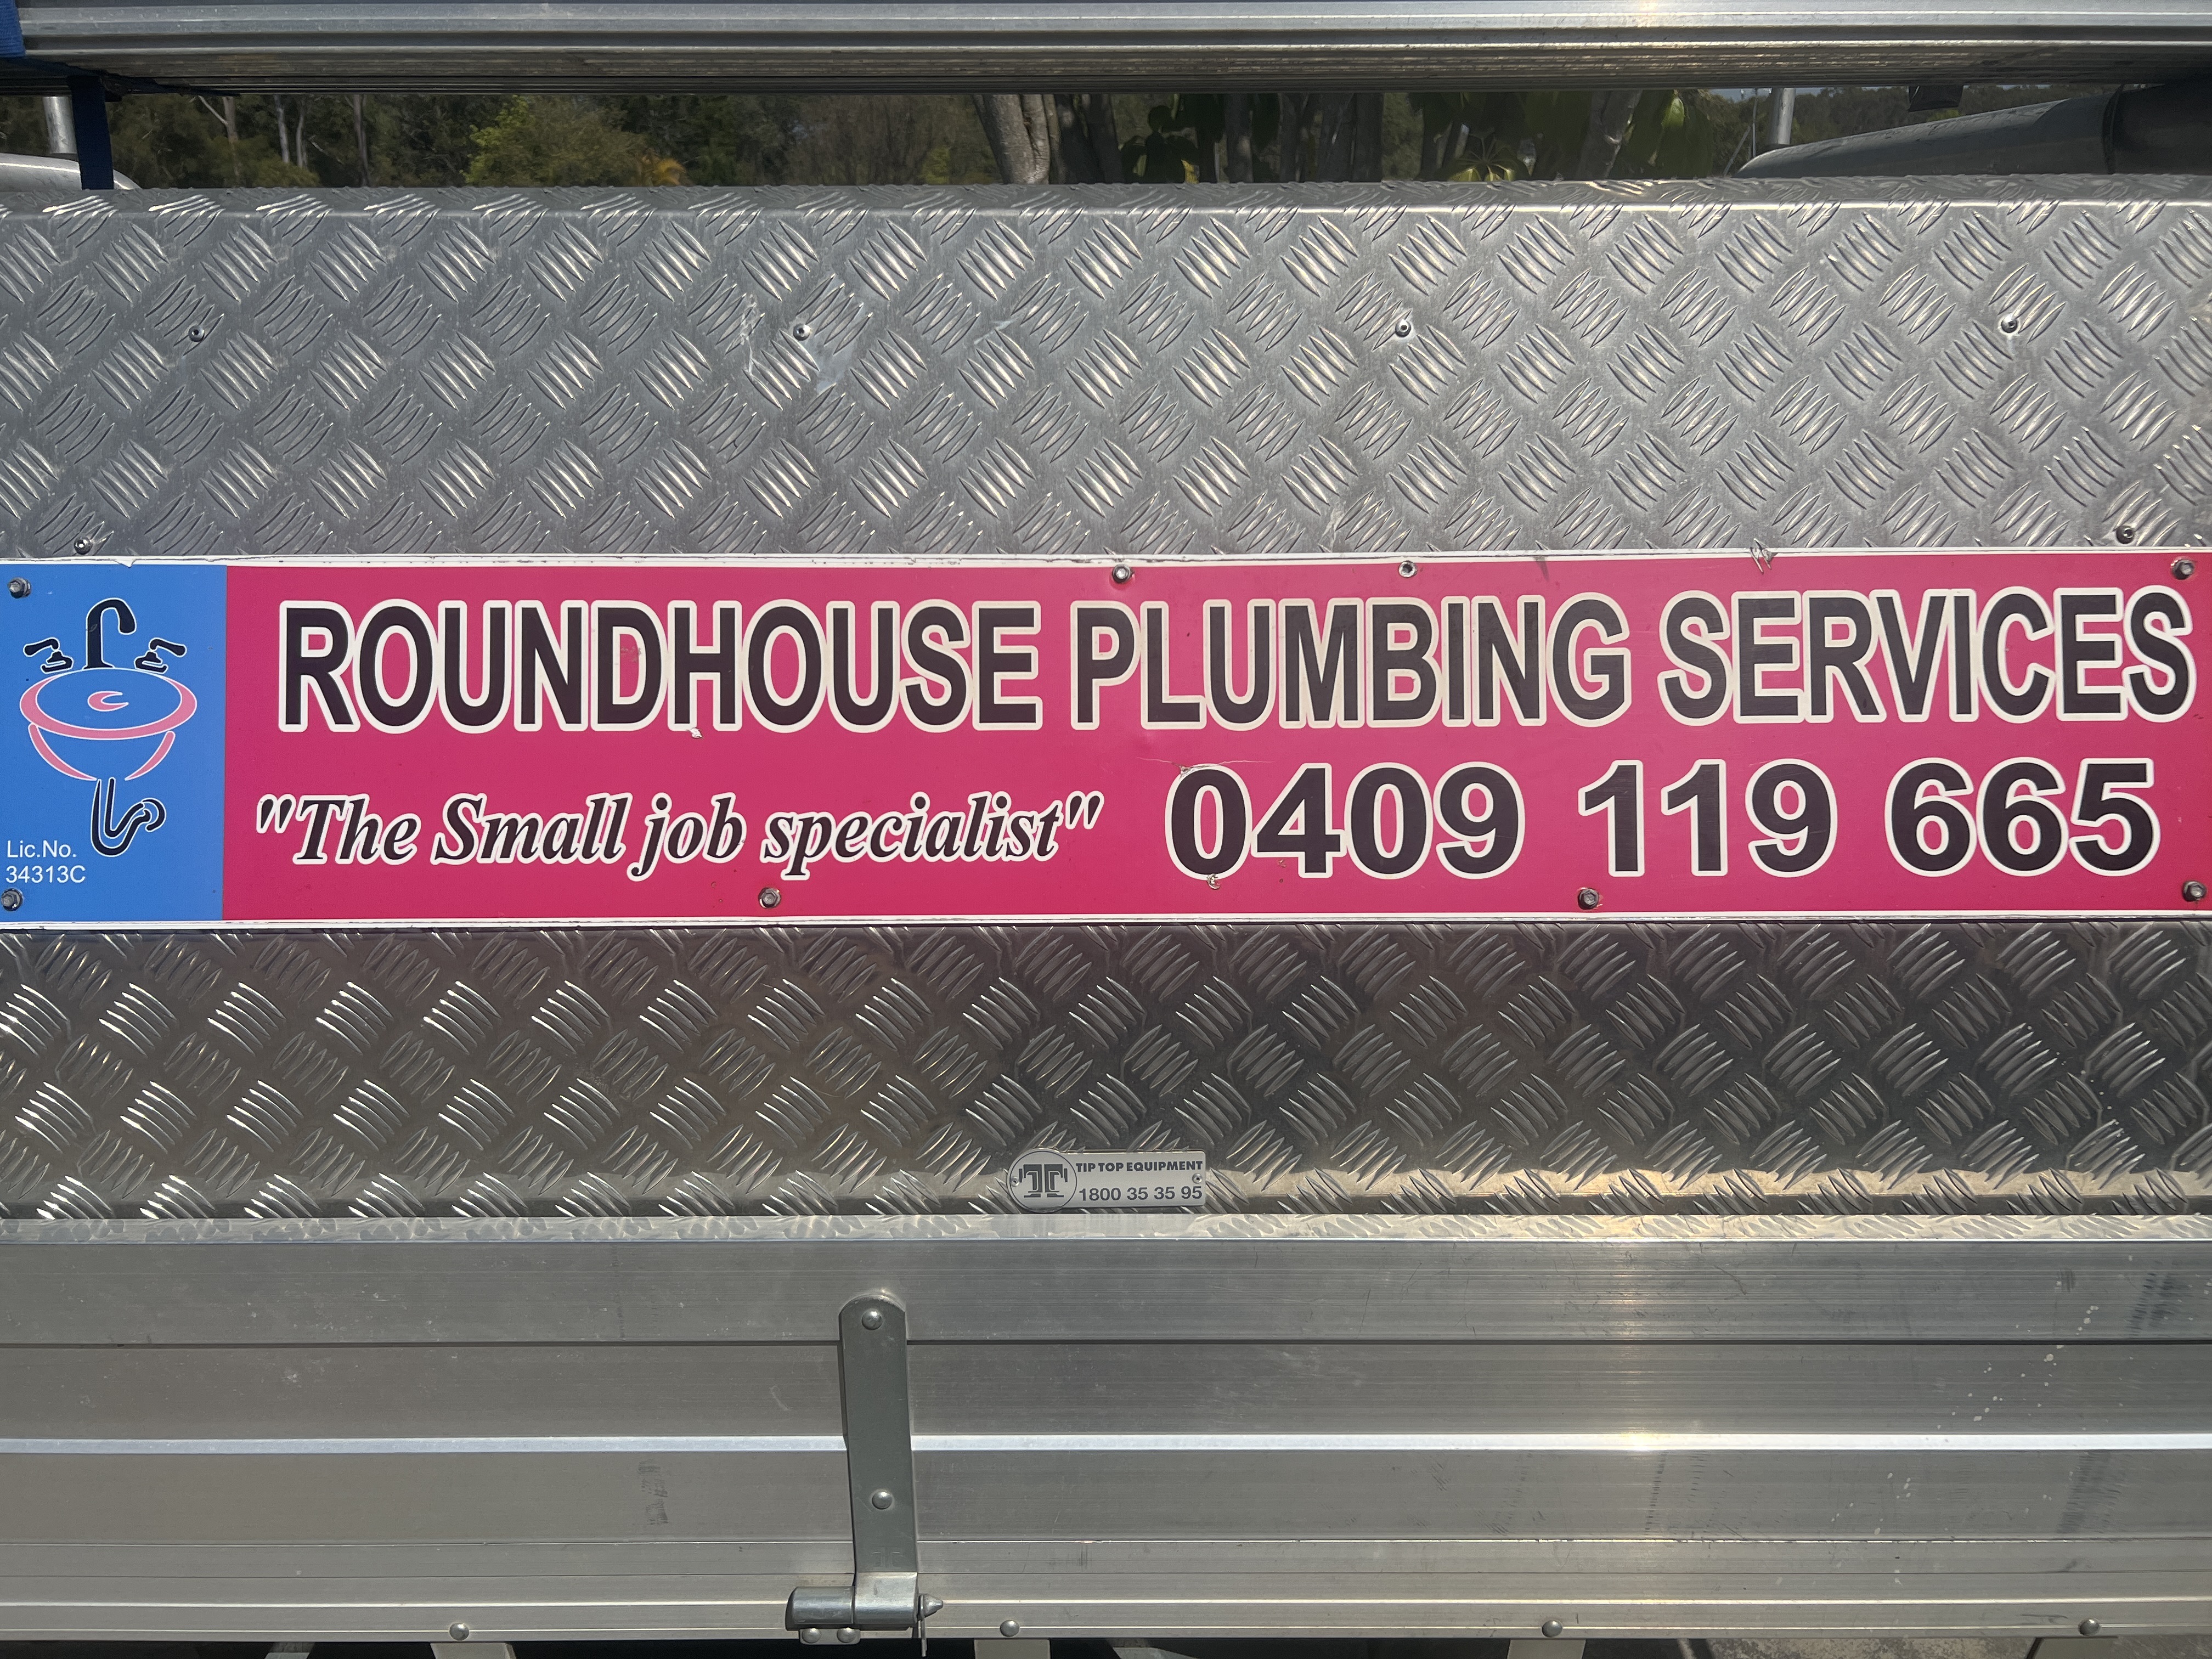 Roundhouse Plumbing Services